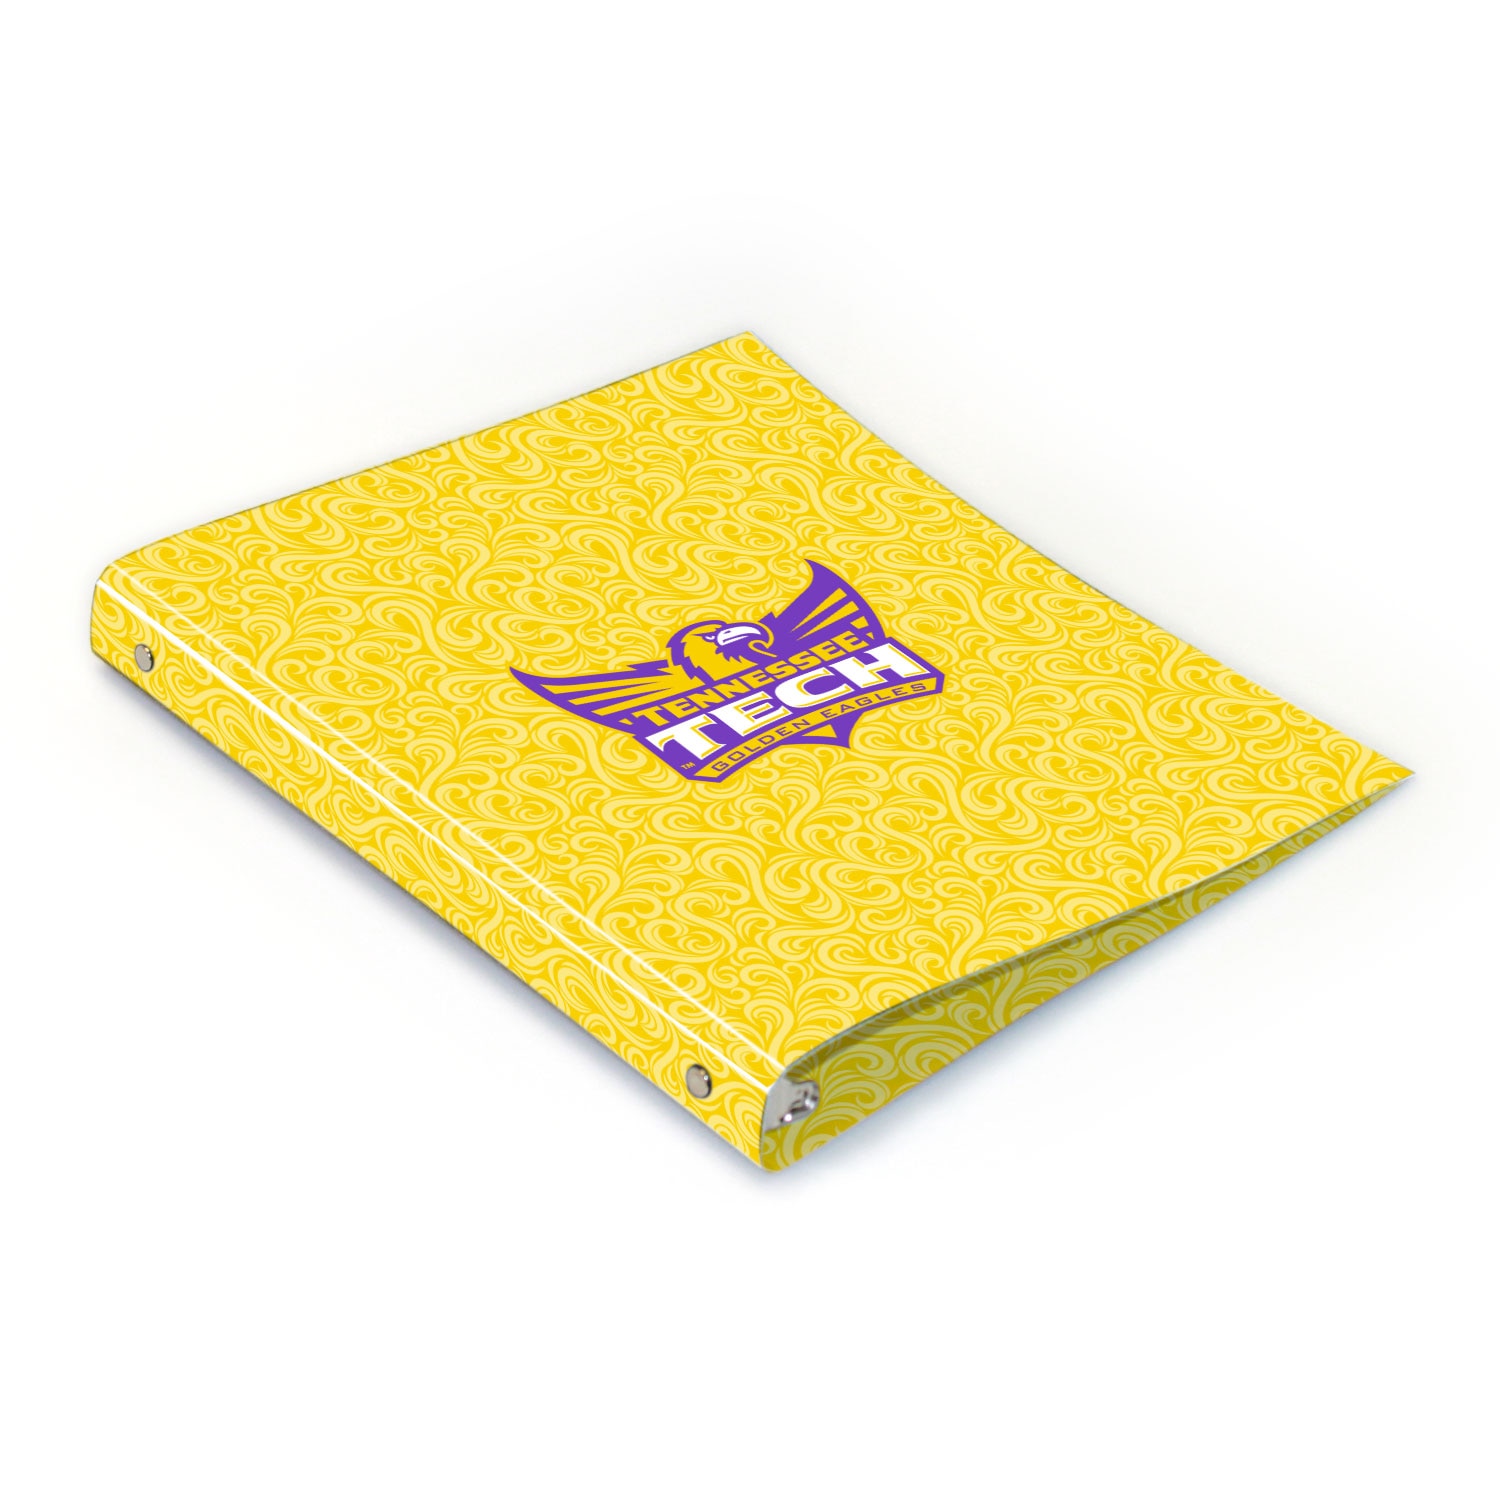 Tennessee Tech Full Color 2 sided Imprinted Flexible 1" Logo 2 Binder 10.5" x 11.5"